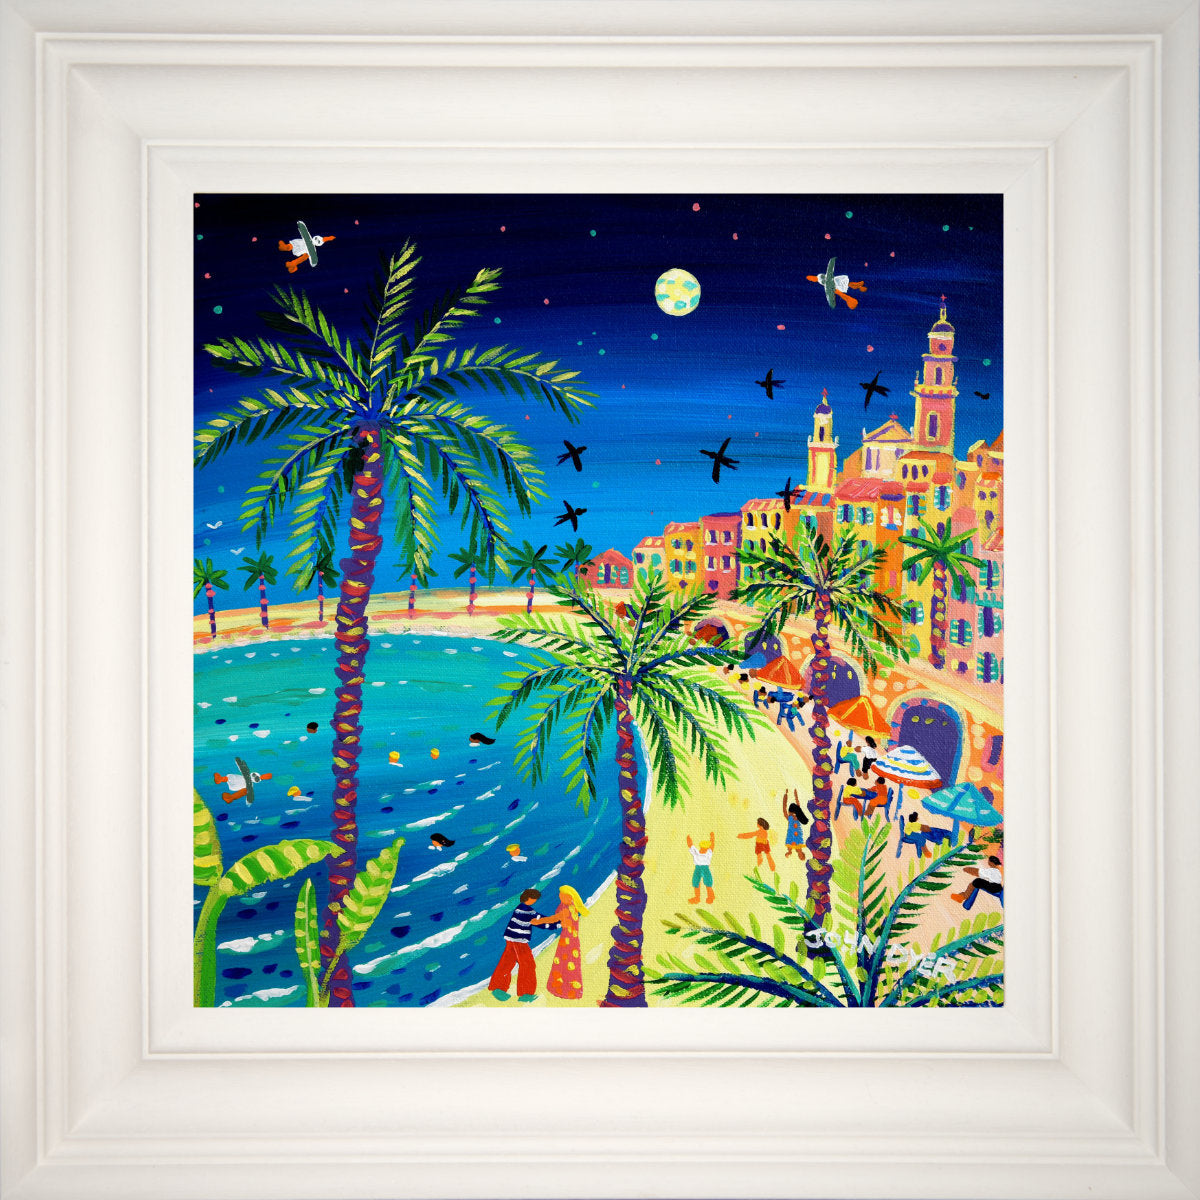 'Love under the Moon, Menton, France', 12x12 inches acrylic on canvas. Paintings of France by British Artist John Dyer. French Art Gallery